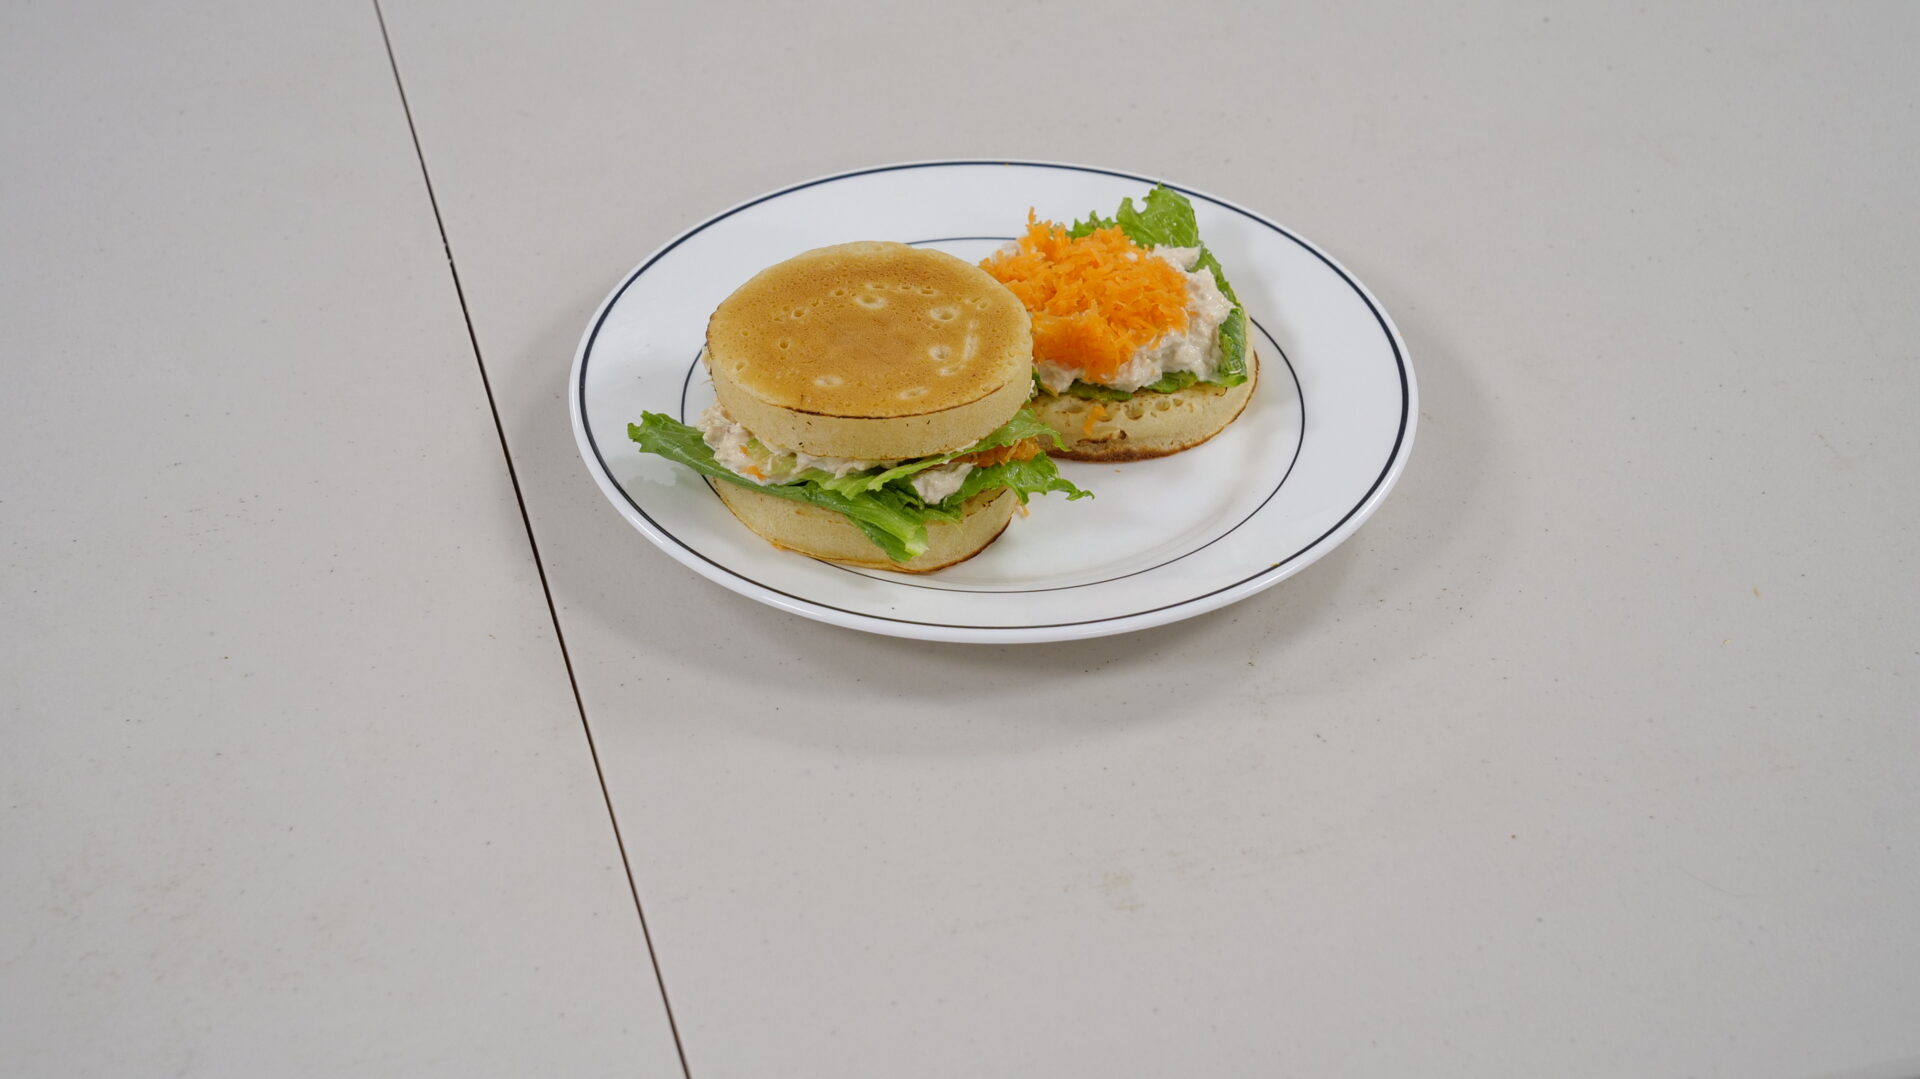 A sandwich on a plate with lettuce and carrot.